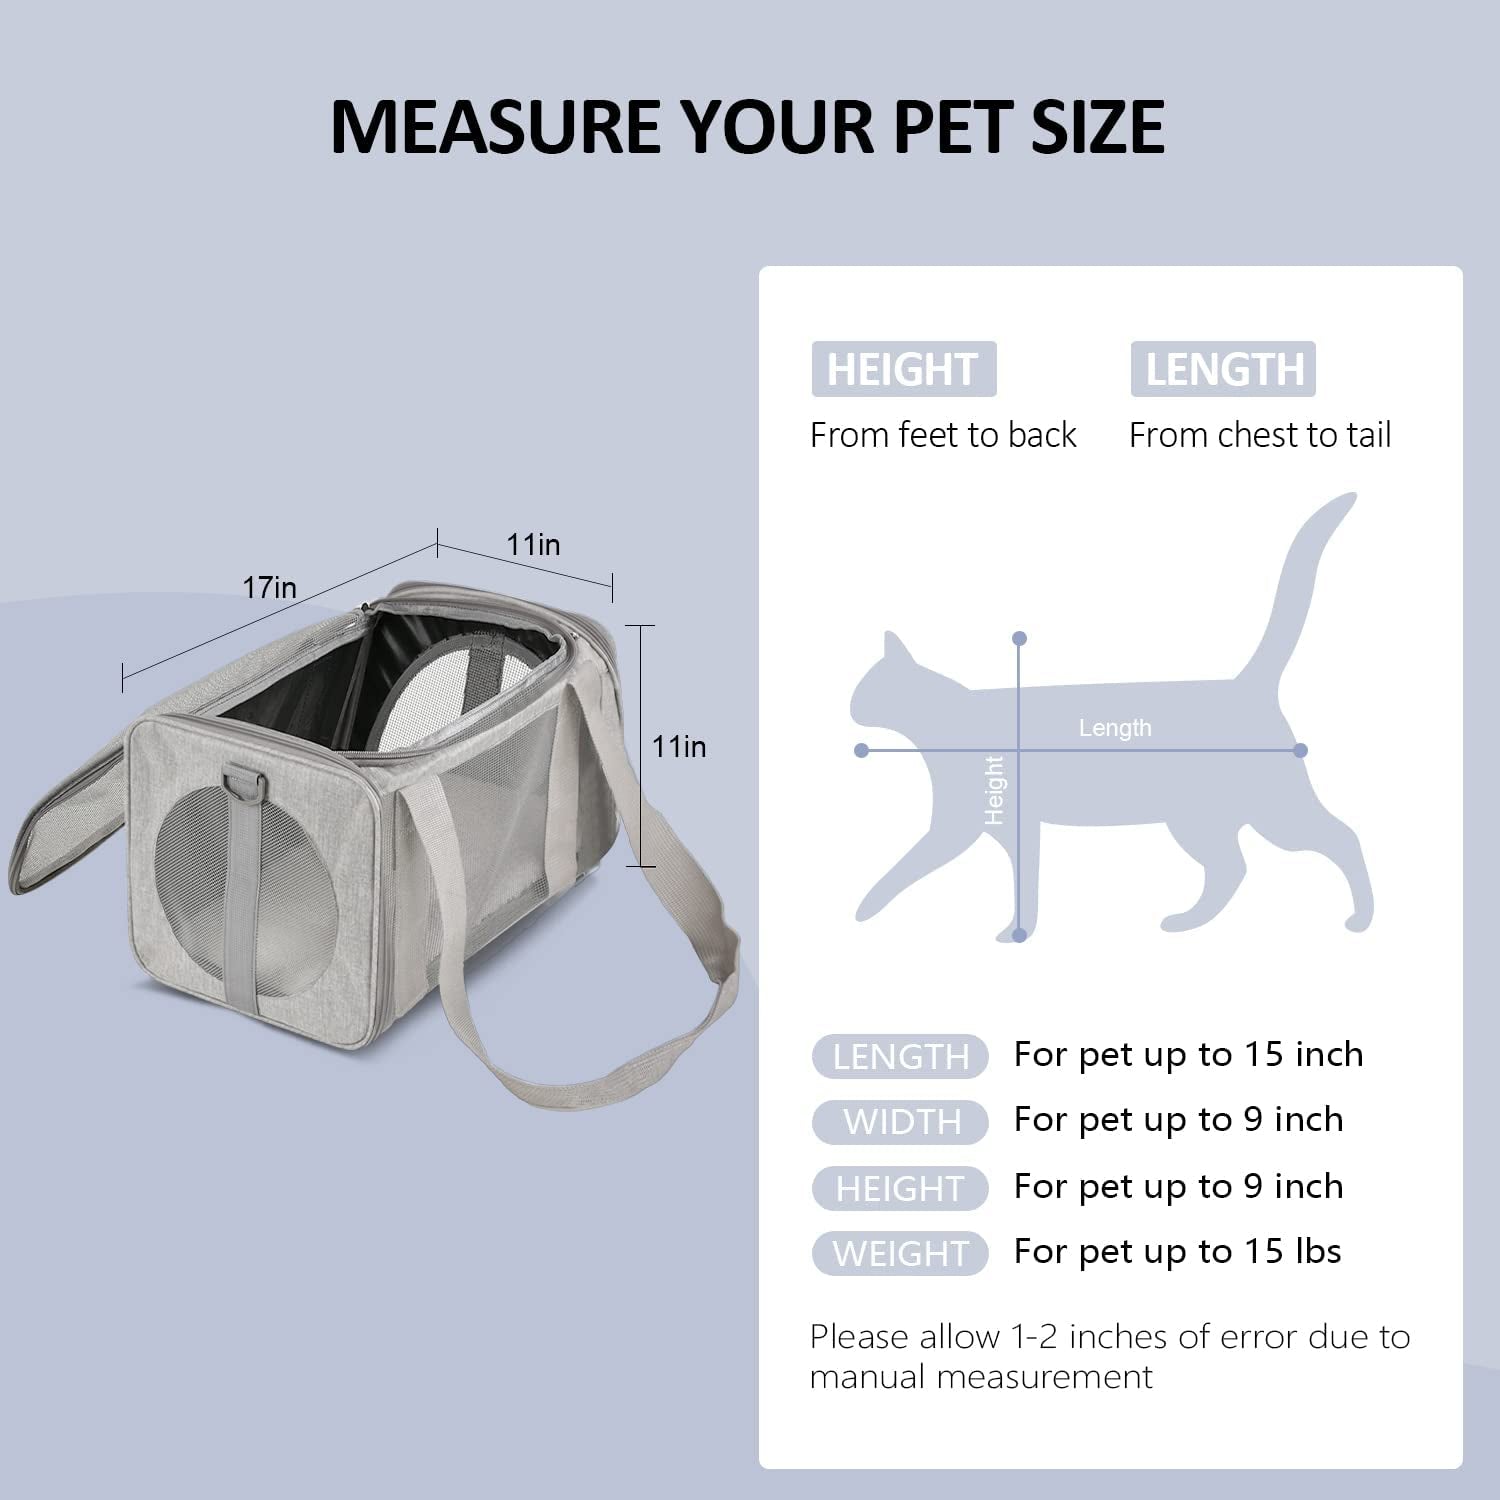 Cat Carriers Dog Carrier Pet Carrier for Small Medium Cats Dogs Puppies up to 15 Lbs, TSA Airline Approved Small Dog Carrier Soft Sided, Collapsible Waterproof Travel Puppy Carrier - Grey